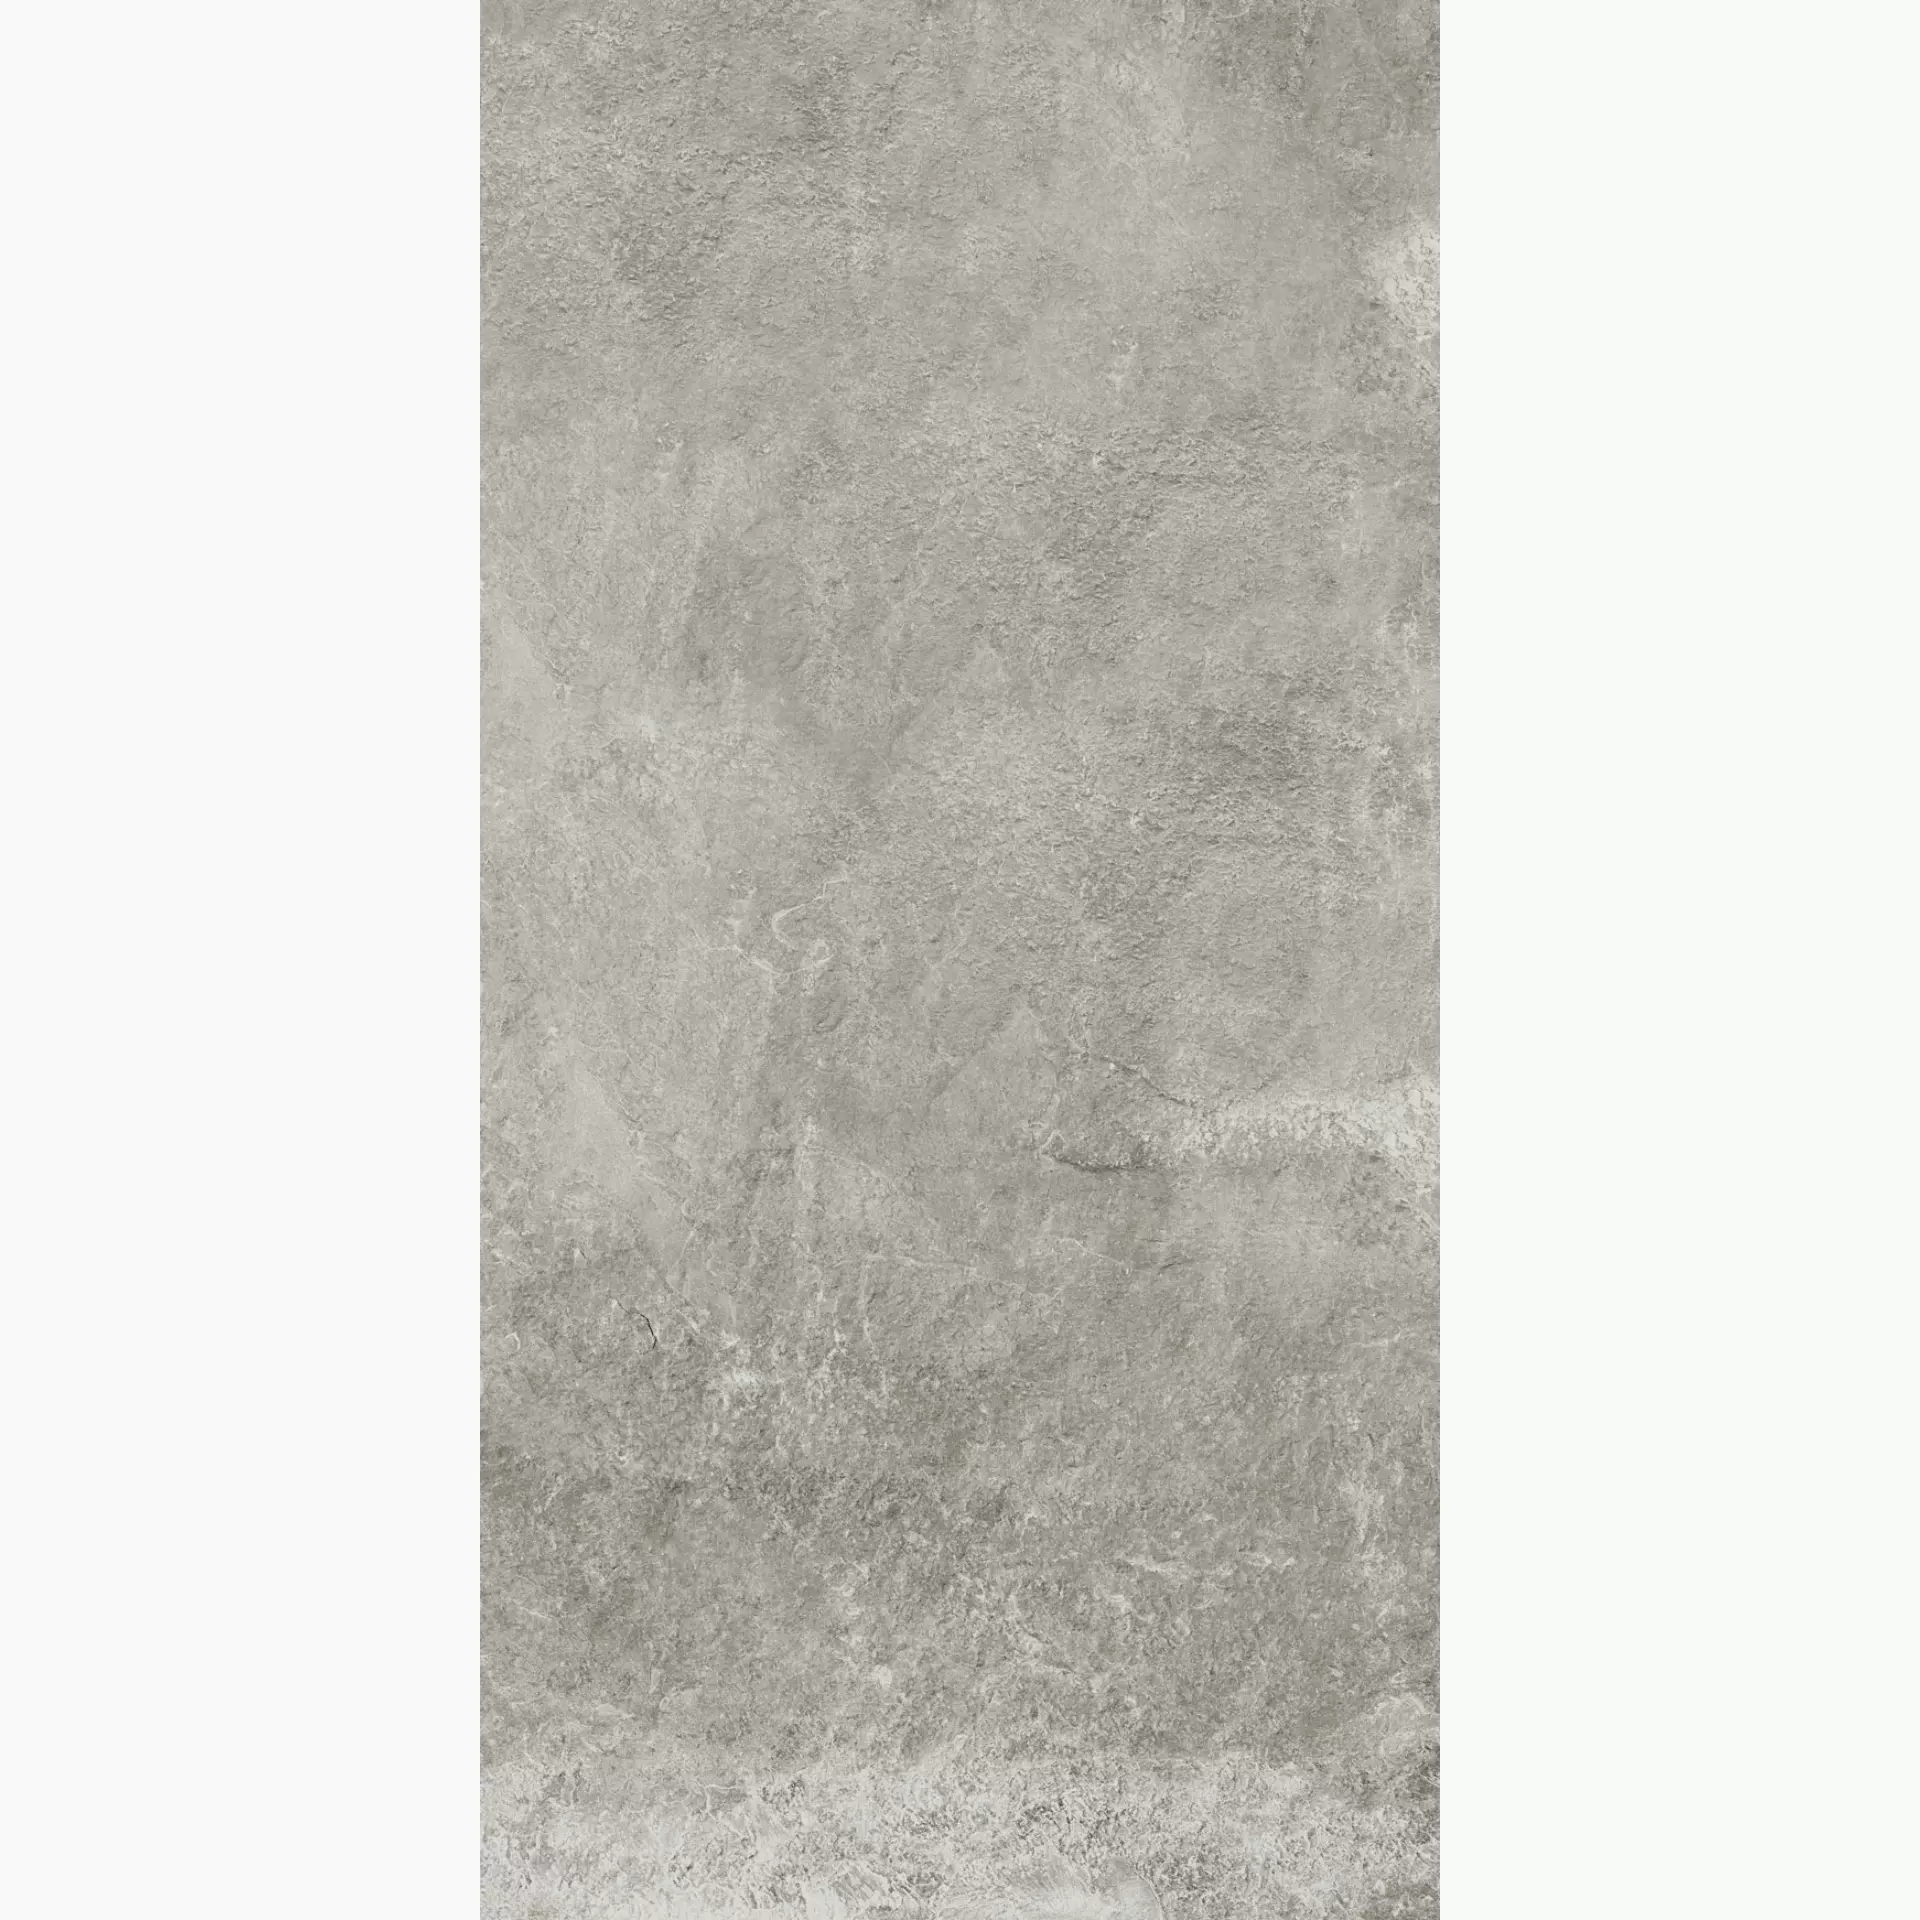 Keope Extreme Grey Strutturato 424E5932 45x90cm rectified 20mm